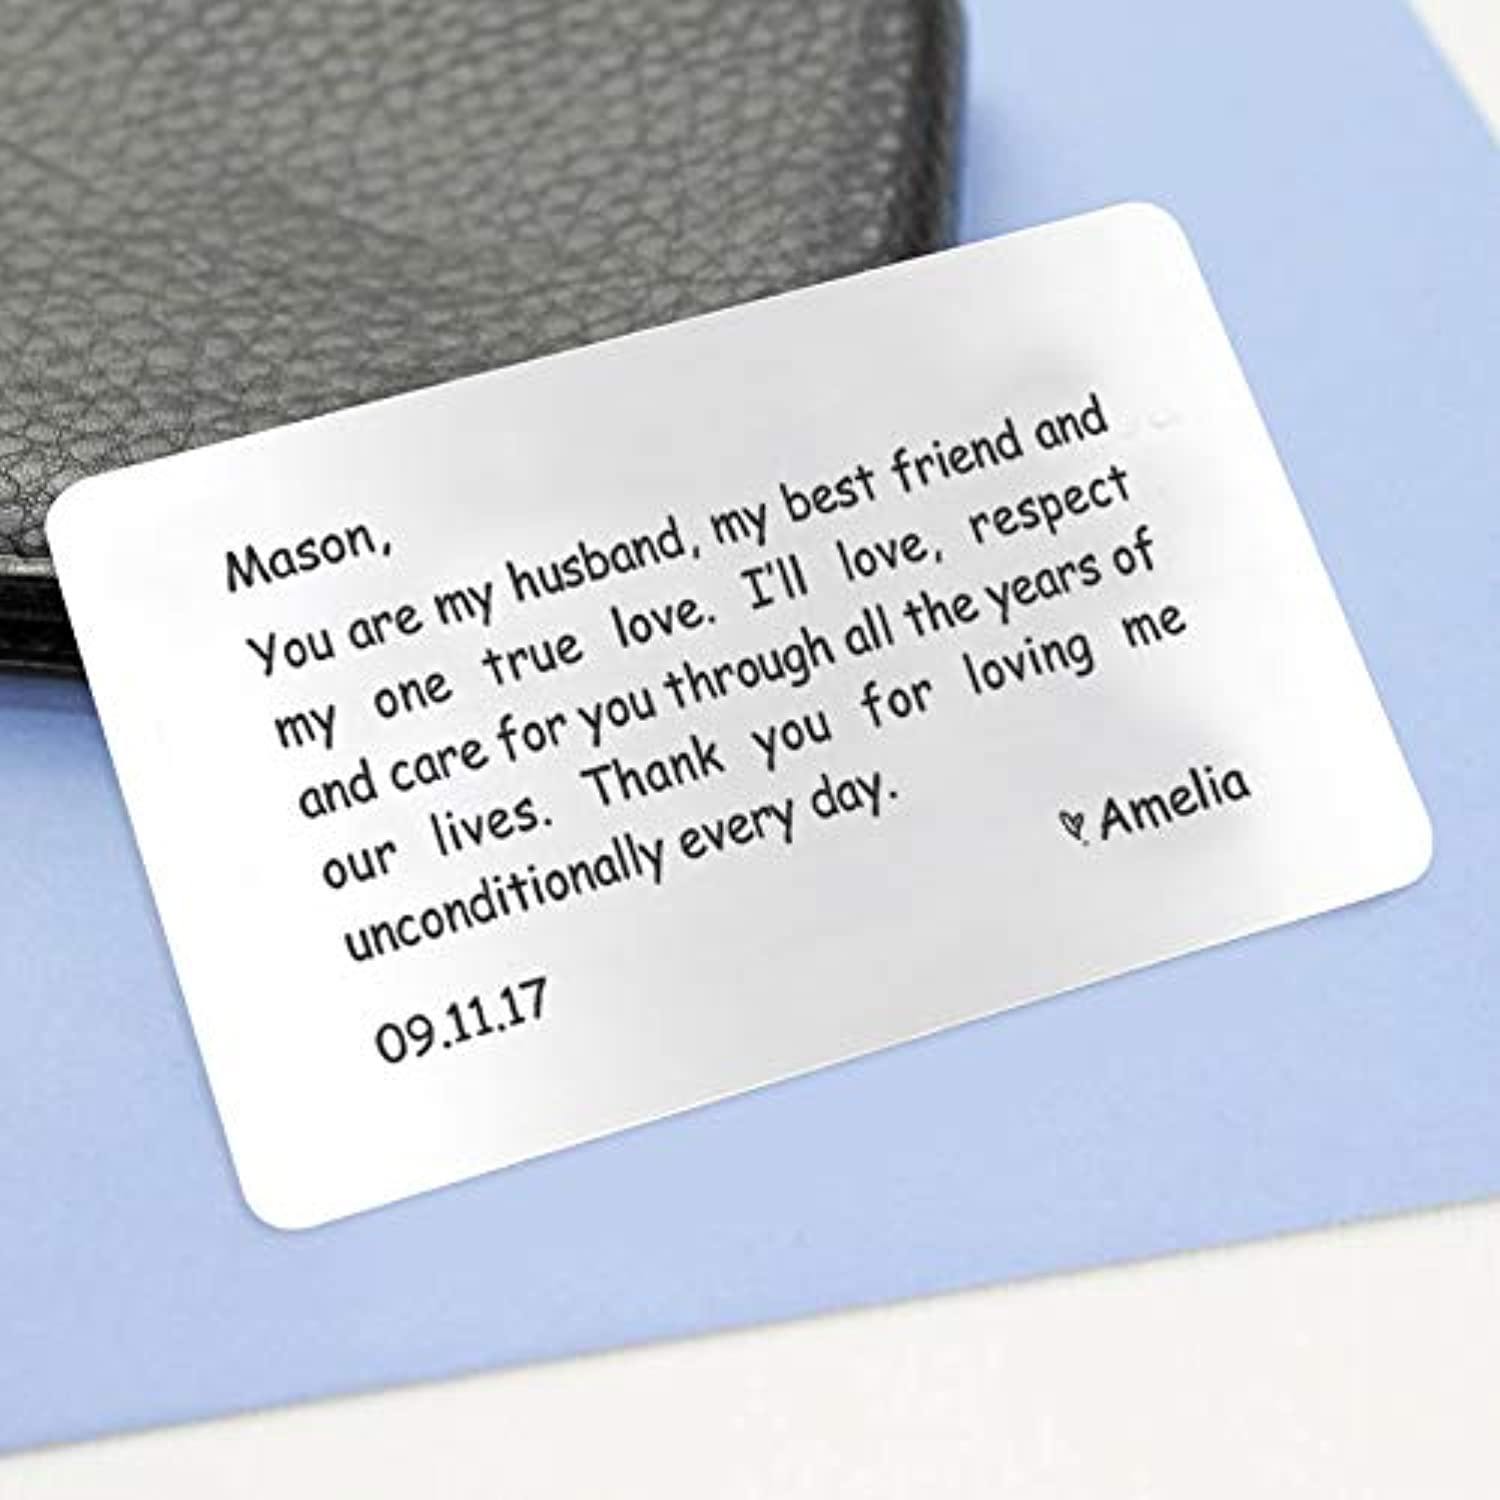 exciting Lives - Missing You Message Box - Gift for Birthday, Anniversary,  Valentine's Day, Christmas Day - for Girlfriend, Boyfriend, Husband, Wife -  8 x 8 x 2.5 cm : Amazon.in: Office Products